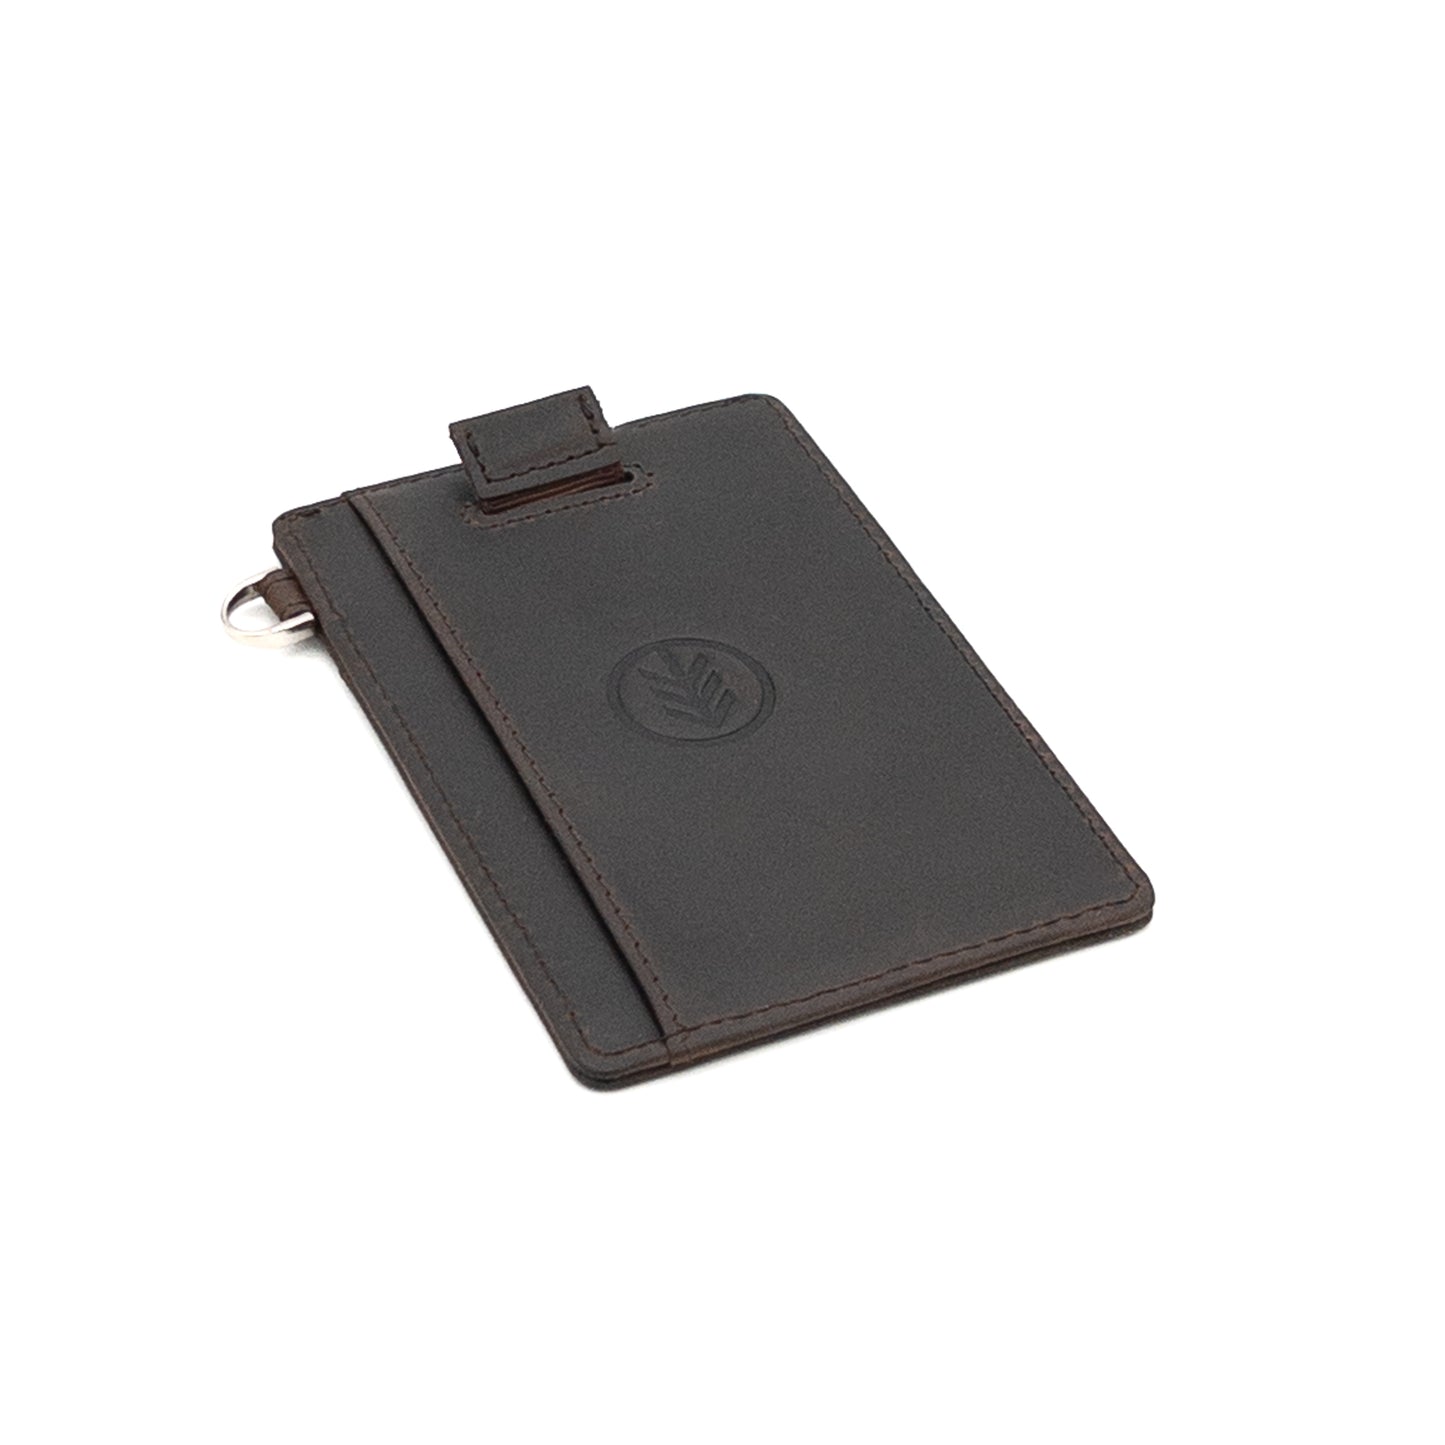 Westmade Mayfield Mini Minimalist Keychain Wallet with Wristlet Tether Cowboy Brown